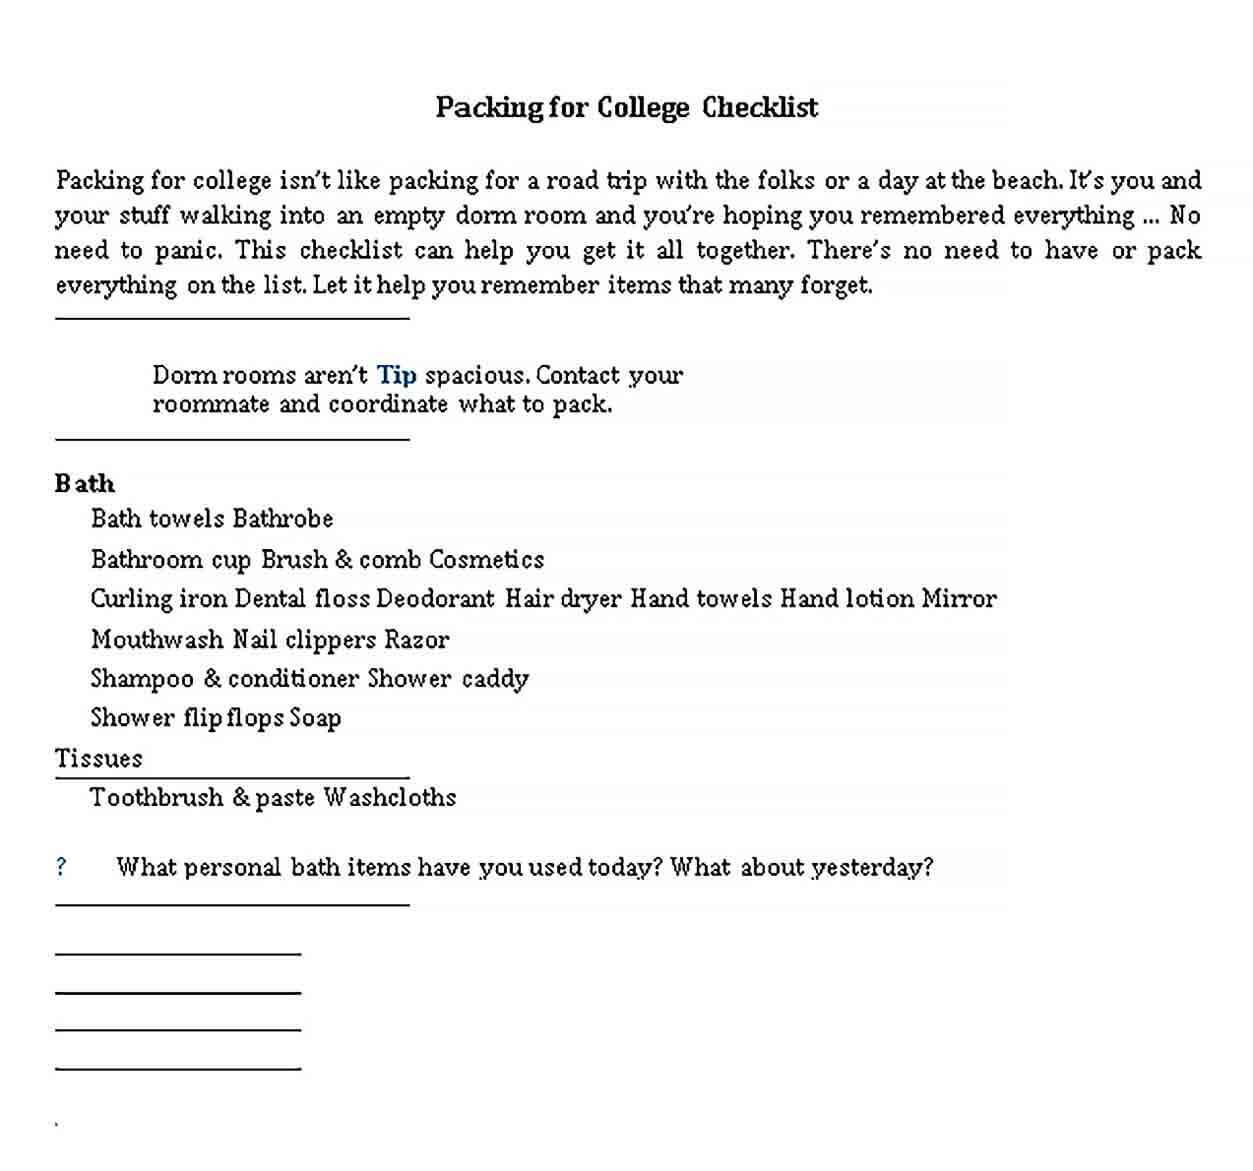 Sample College Packing Checklist 1